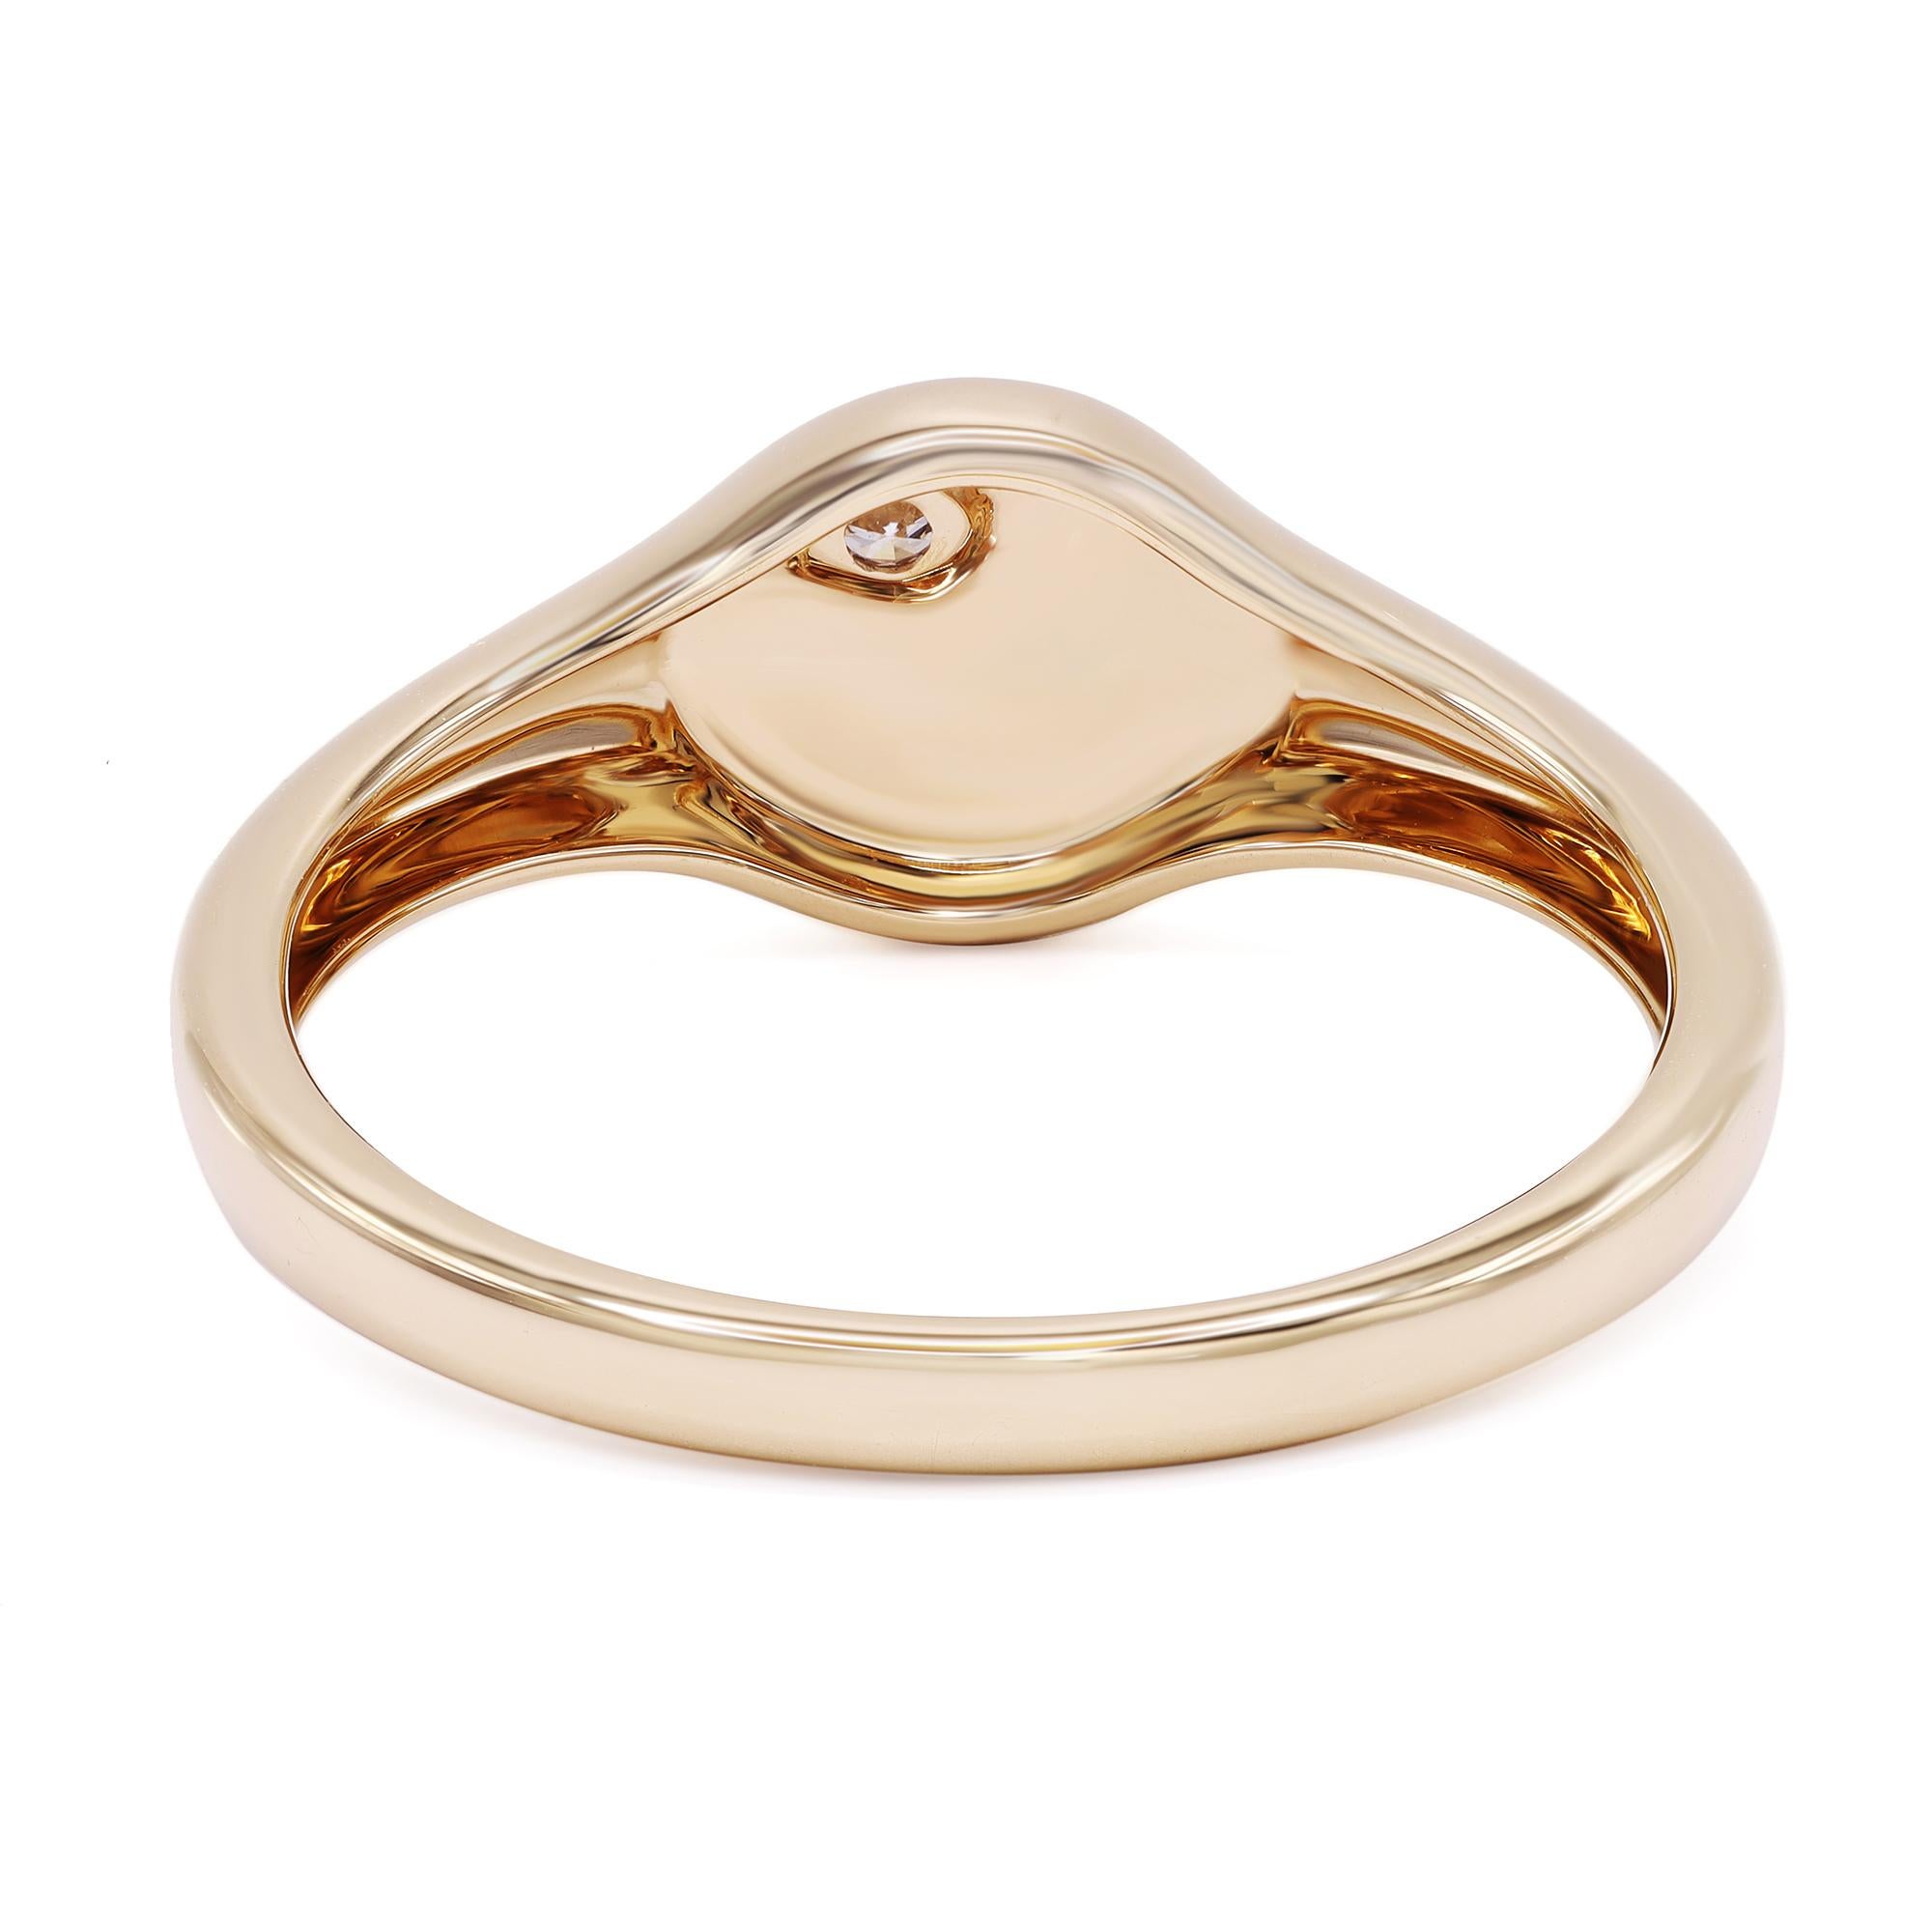 Bold look in a classic style, crafted in 14k yellow gold. This round signet ring features a round-cut diamond as a dose of sparkle to complement its high-polished solid gold finish. Total diamond weight: 0.03ct. Ring size 7. Width: 3.2mm. Weight: